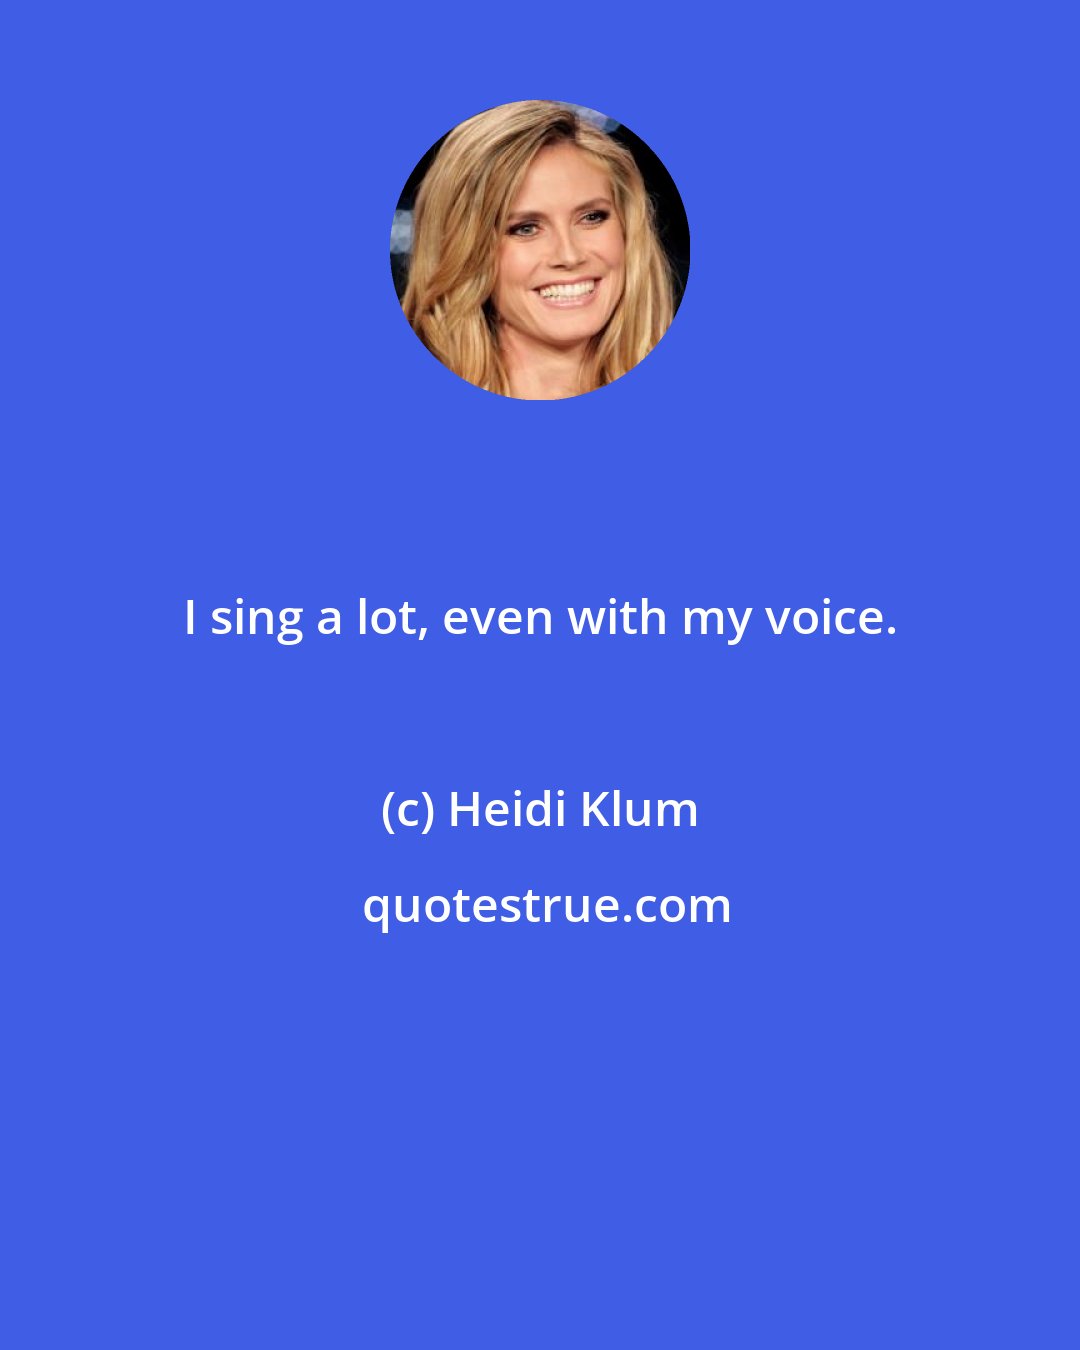 Heidi Klum: I sing a lot, even with my voice.